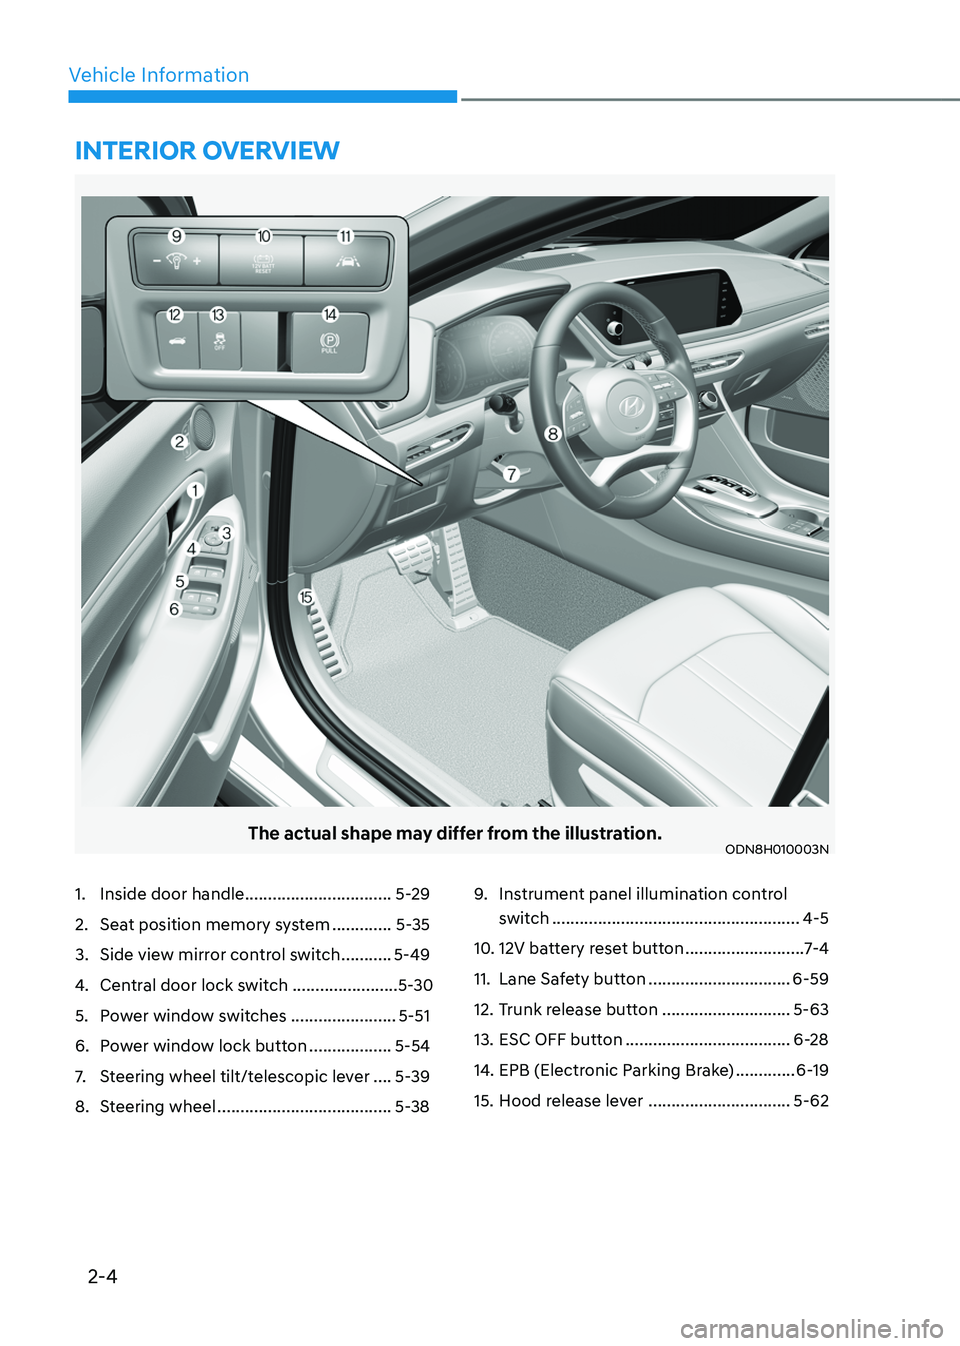 HYUNDAI SONATA HYBRID 2022  Owners Manual 2-4
Vehicle Information
The actual shape may differ from the illustration.ODN8H010003N
1. Inside door handle ................................5-29
2. Seat position memory system .............5-35
3. Si